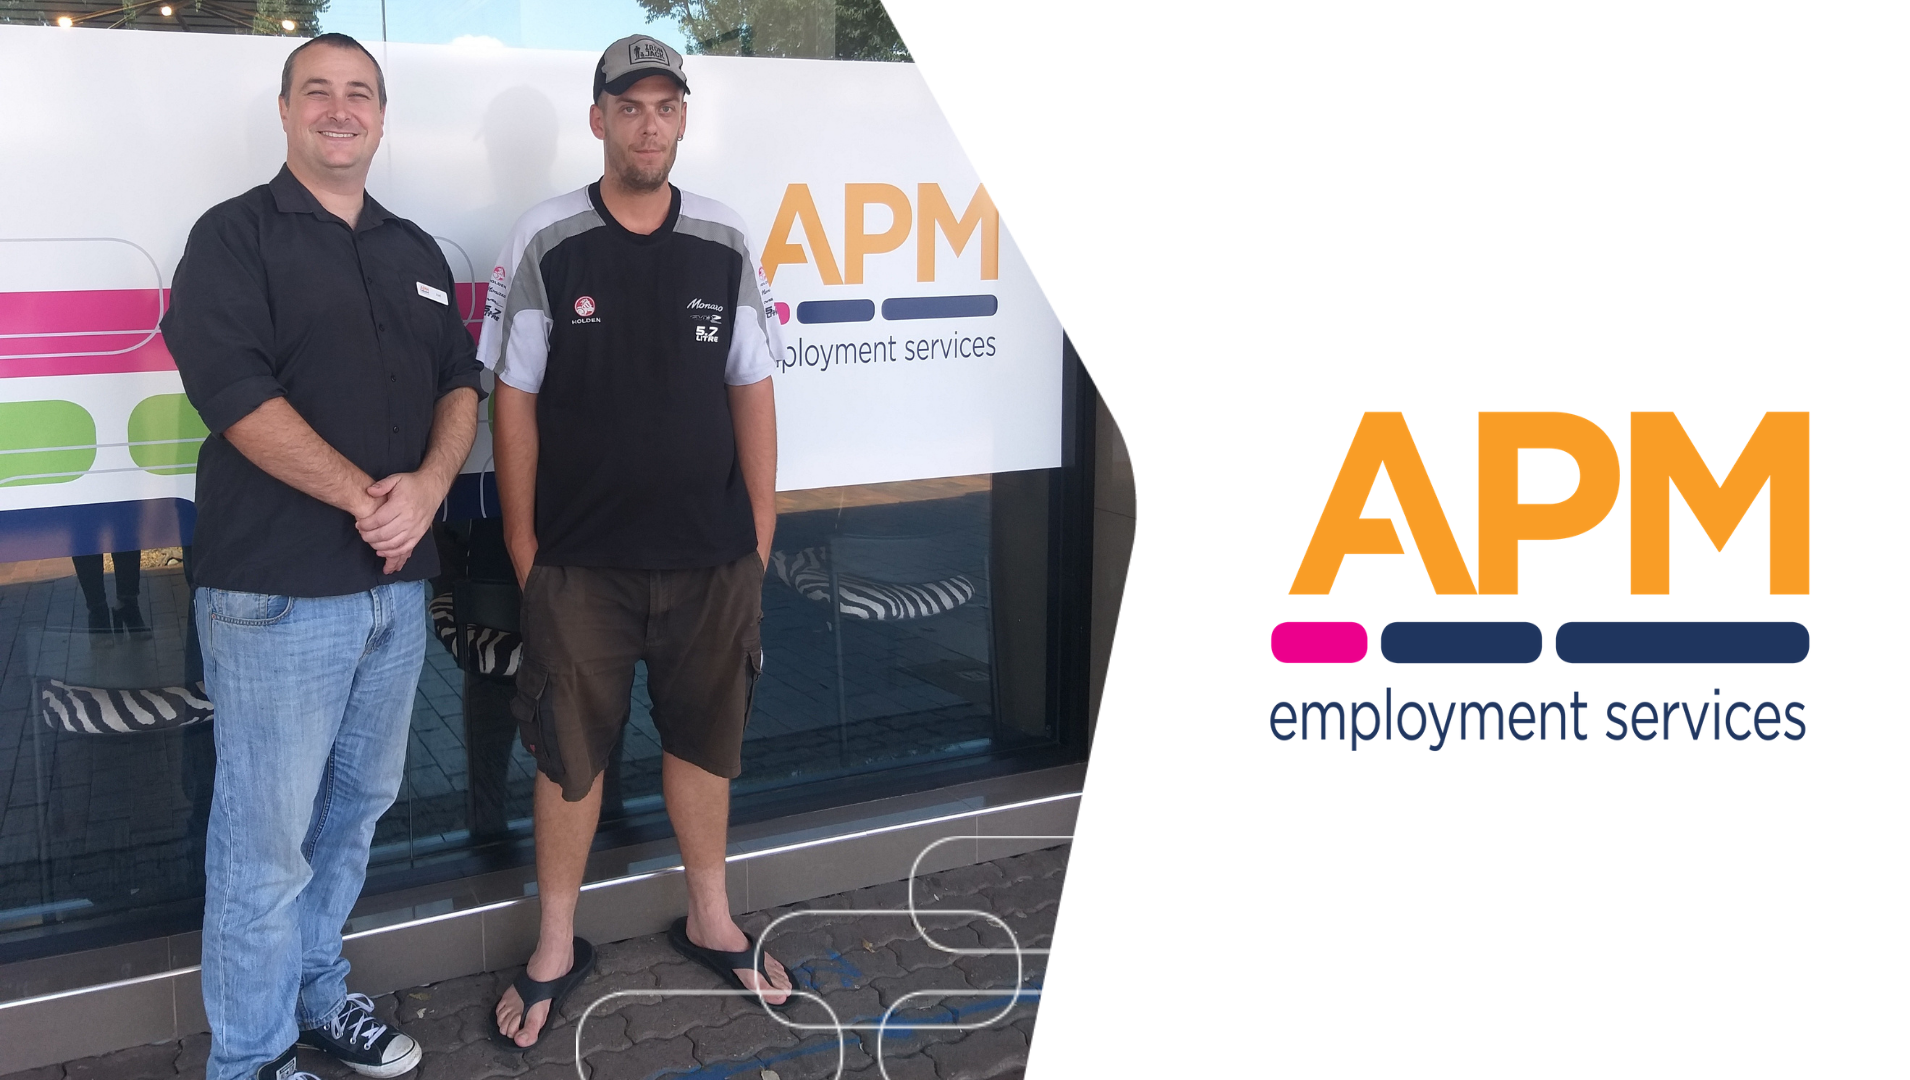 Joel and Tod are pictured together, smiling in front of the APM Dubbo office